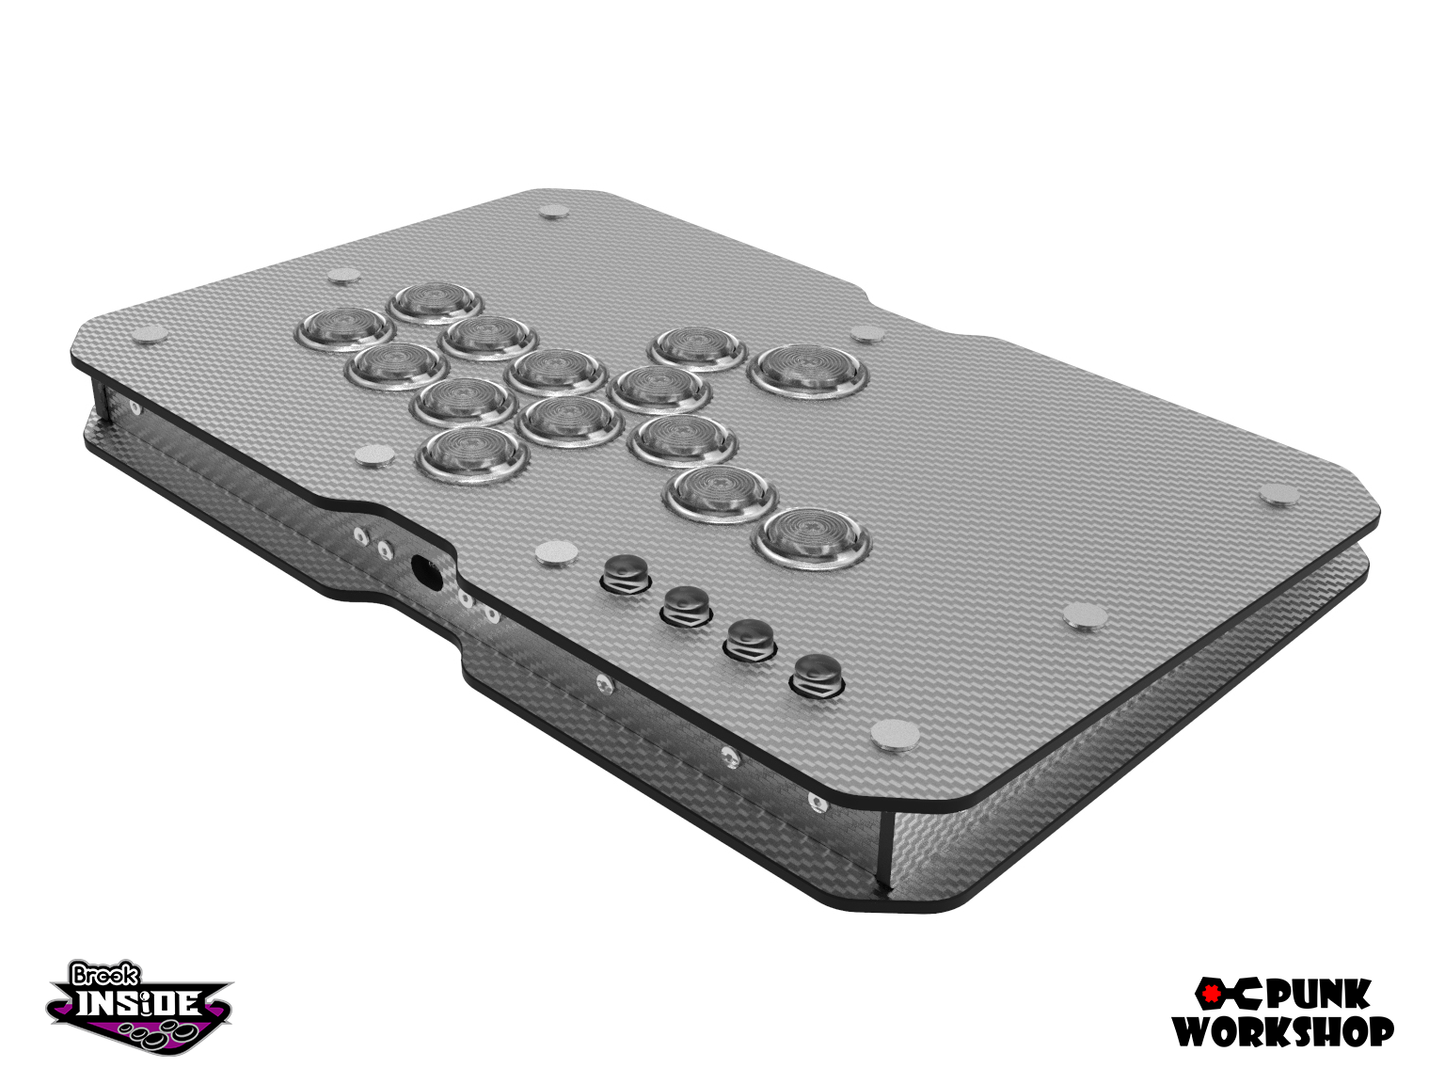 MINI BOX CARBON レバーレスコントローラー 2023 (Brook PS5 PS4 PS3/Switch/PC)